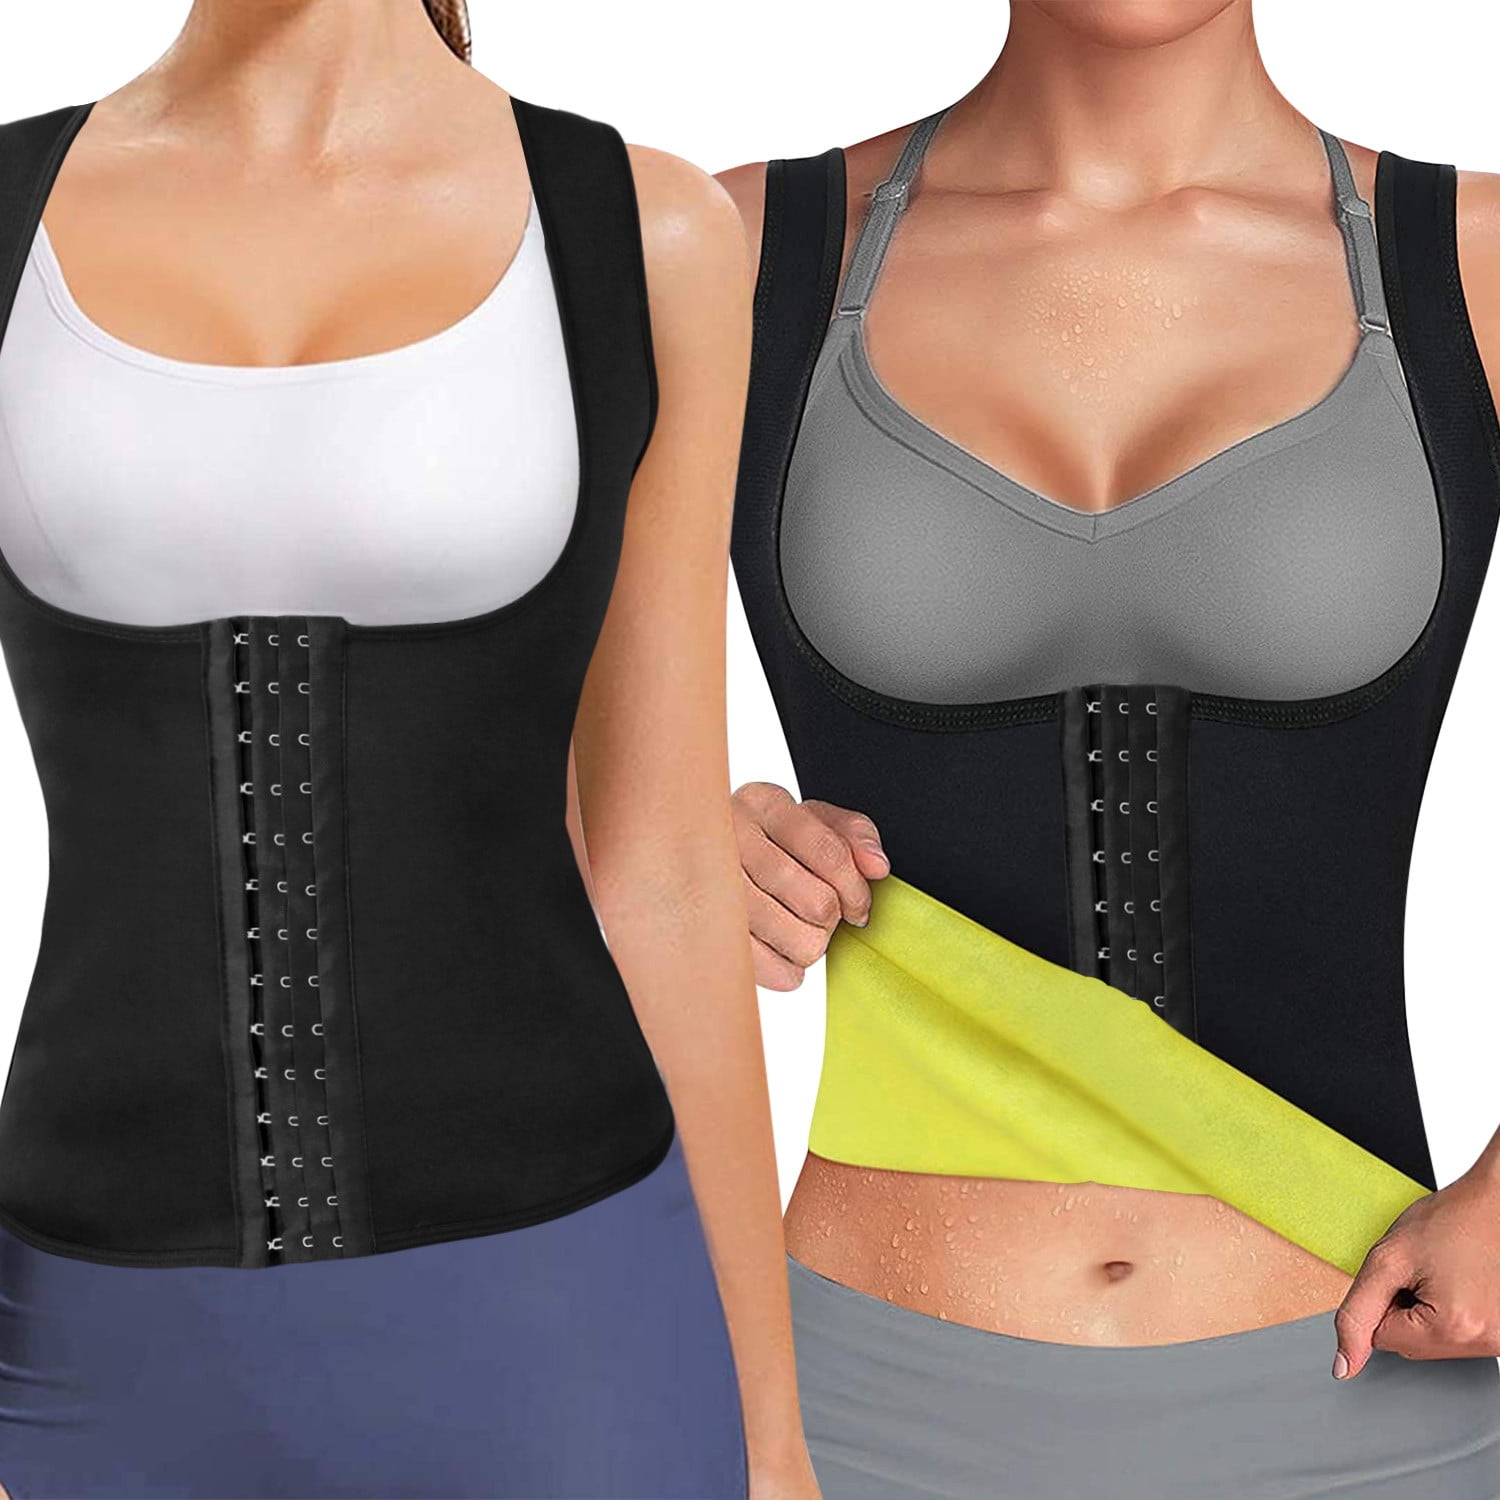 US Sports Neoprene Sauna Vest with Sleeves Gym Hot Sweat Suit Weight Loss Corset 